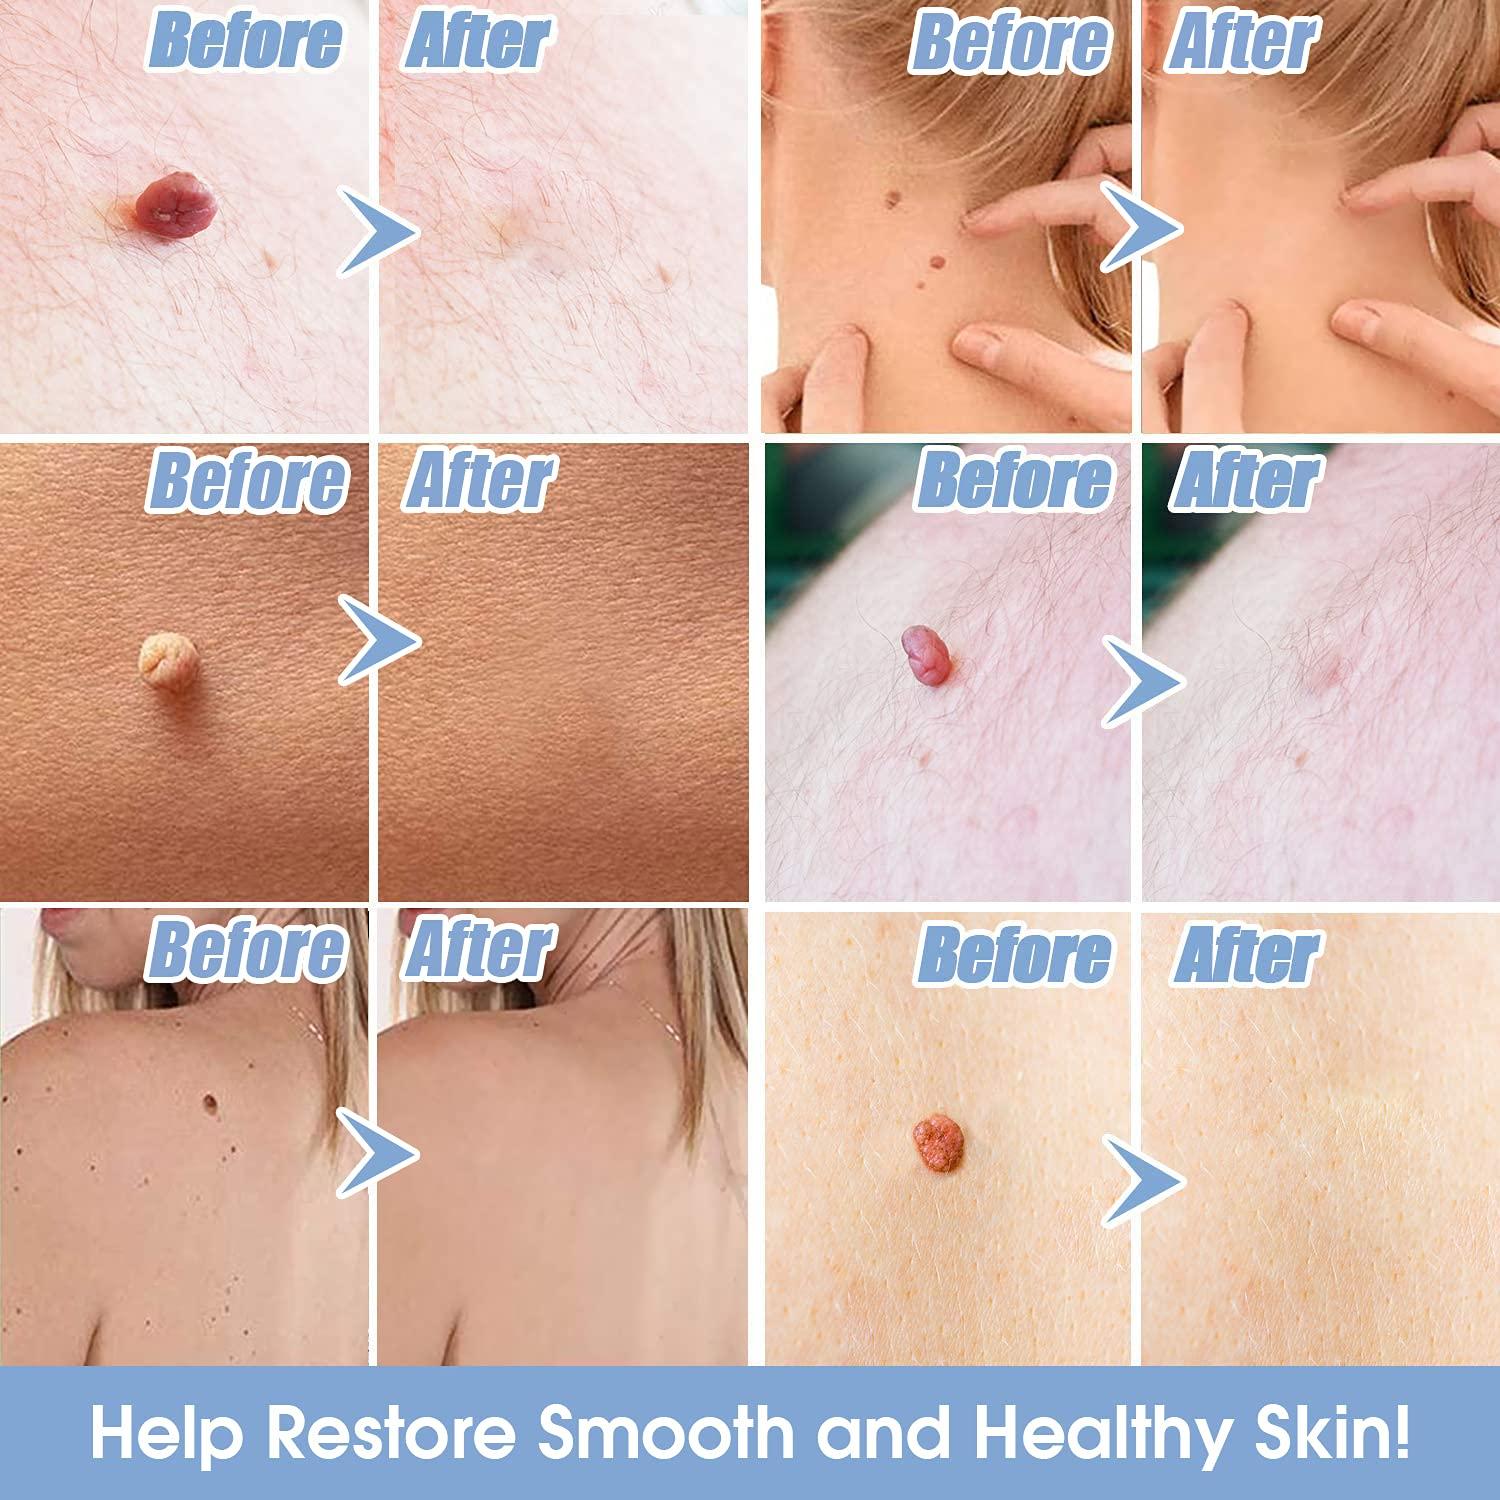 Skin Tag Remover Removes Skin Tags in as Little as 1 Treatment